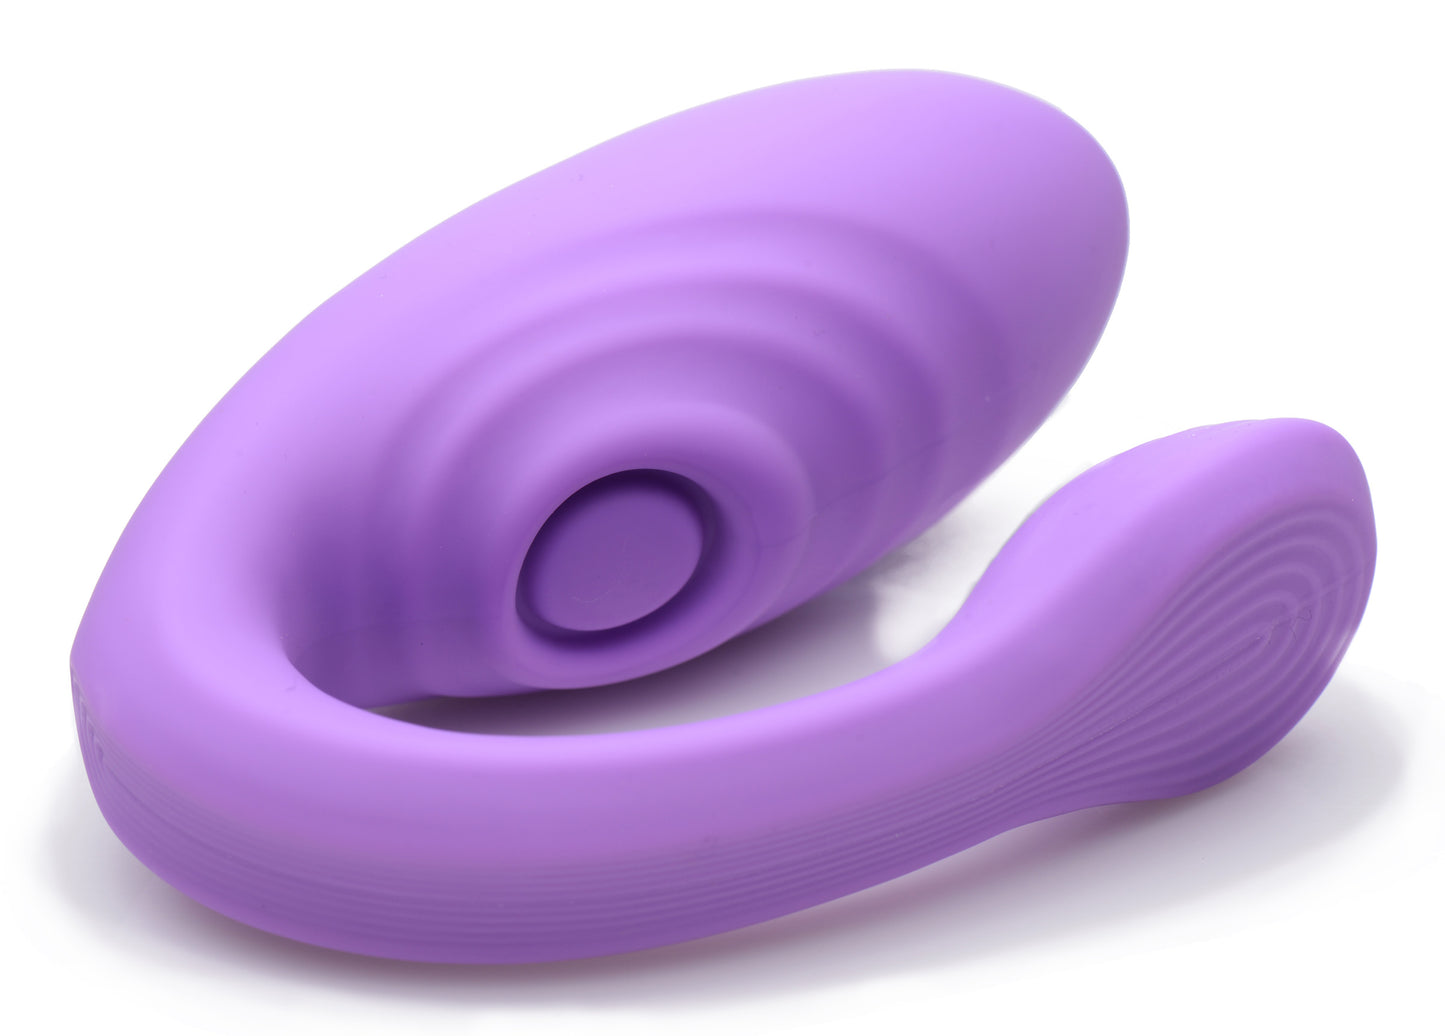 7x Pulse Pro Pulsating And Clit Stimulating Vibrator With Remote Control